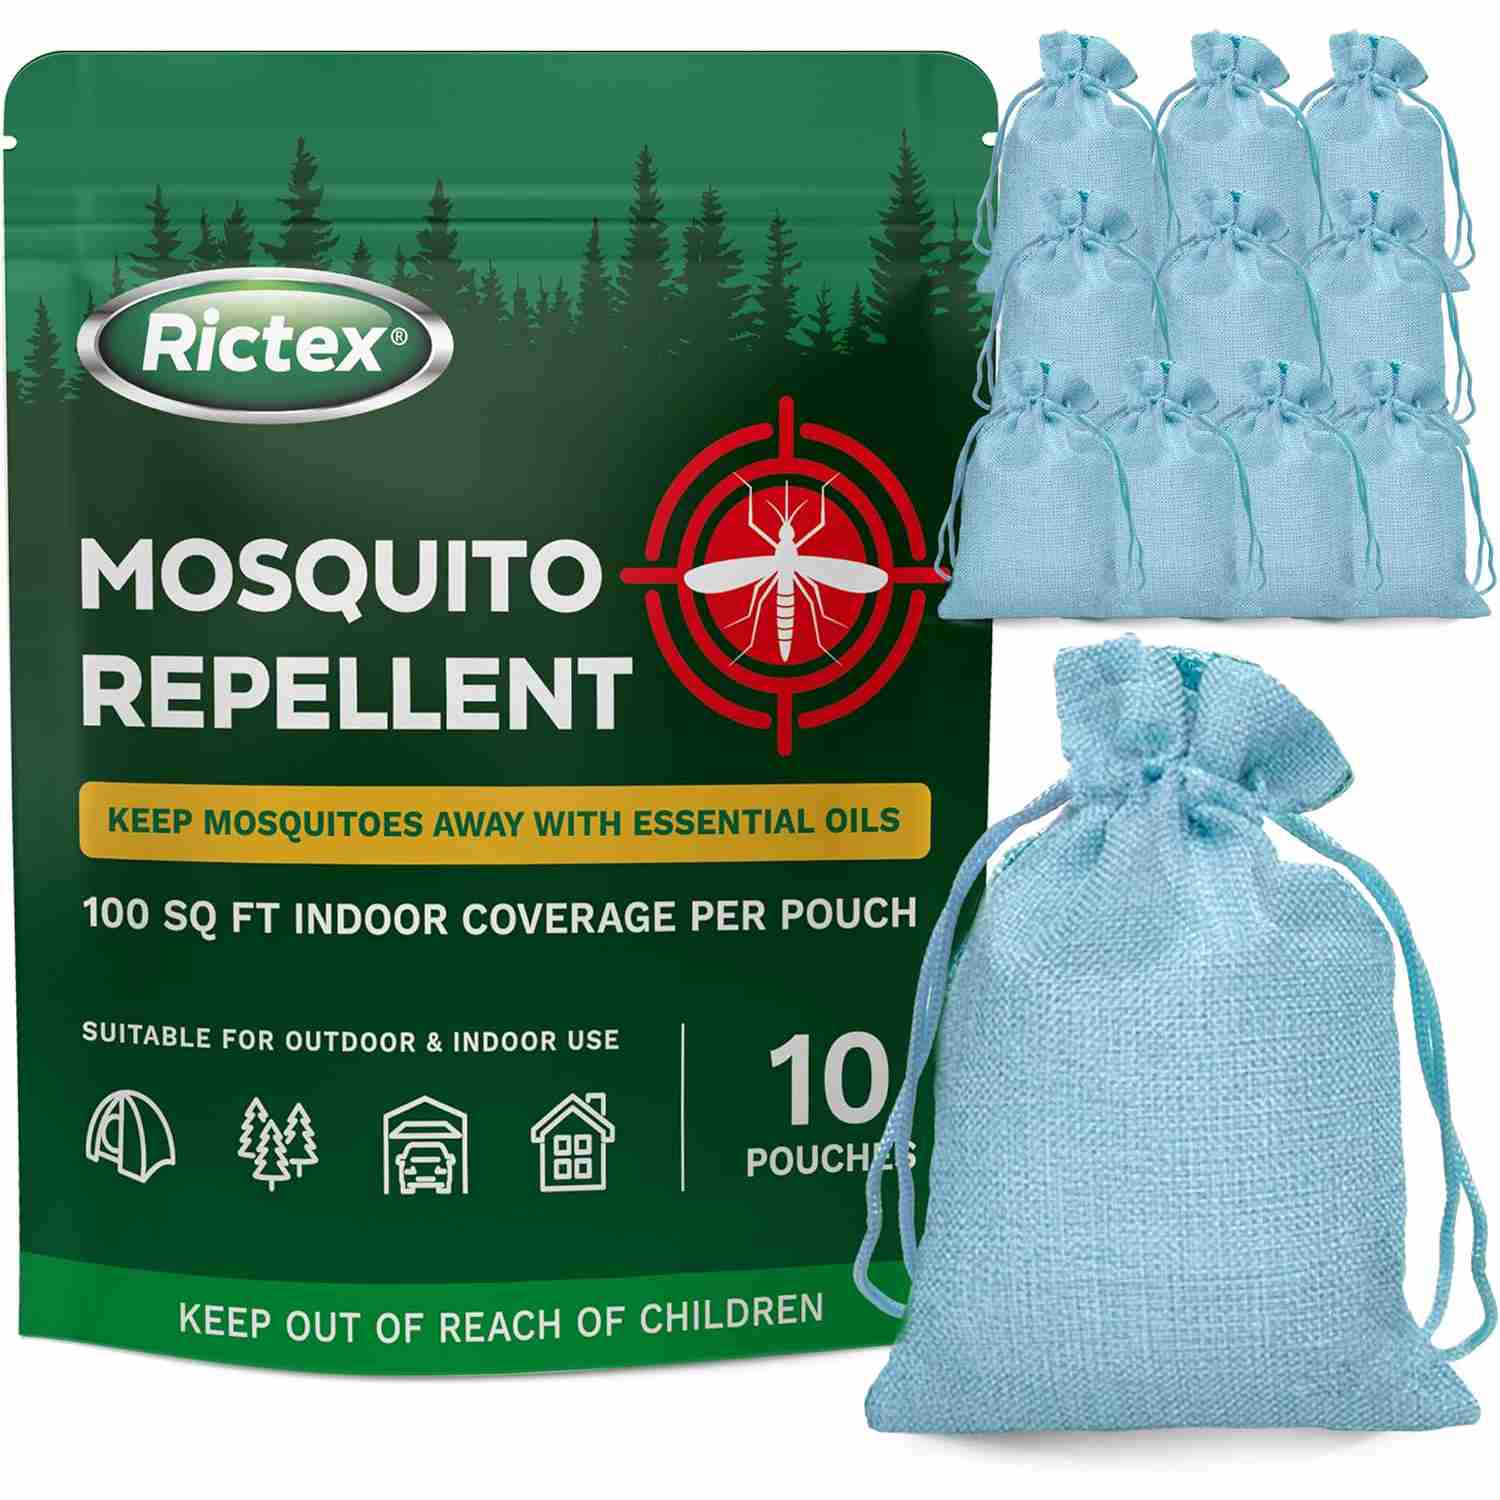 outdoor-mosquito-repellent with cash back rebate